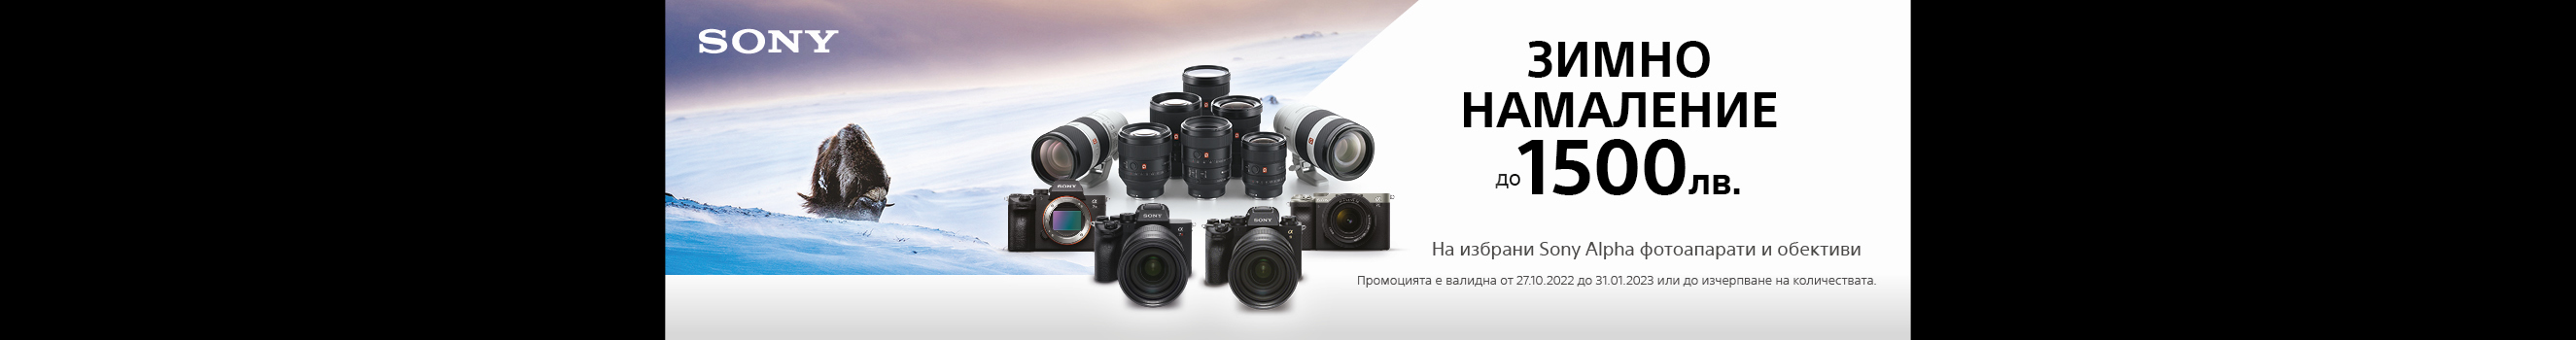 Sony - Cameras and Lenses at Discount Prices and Promotional Discounts at PhotoSynthesis